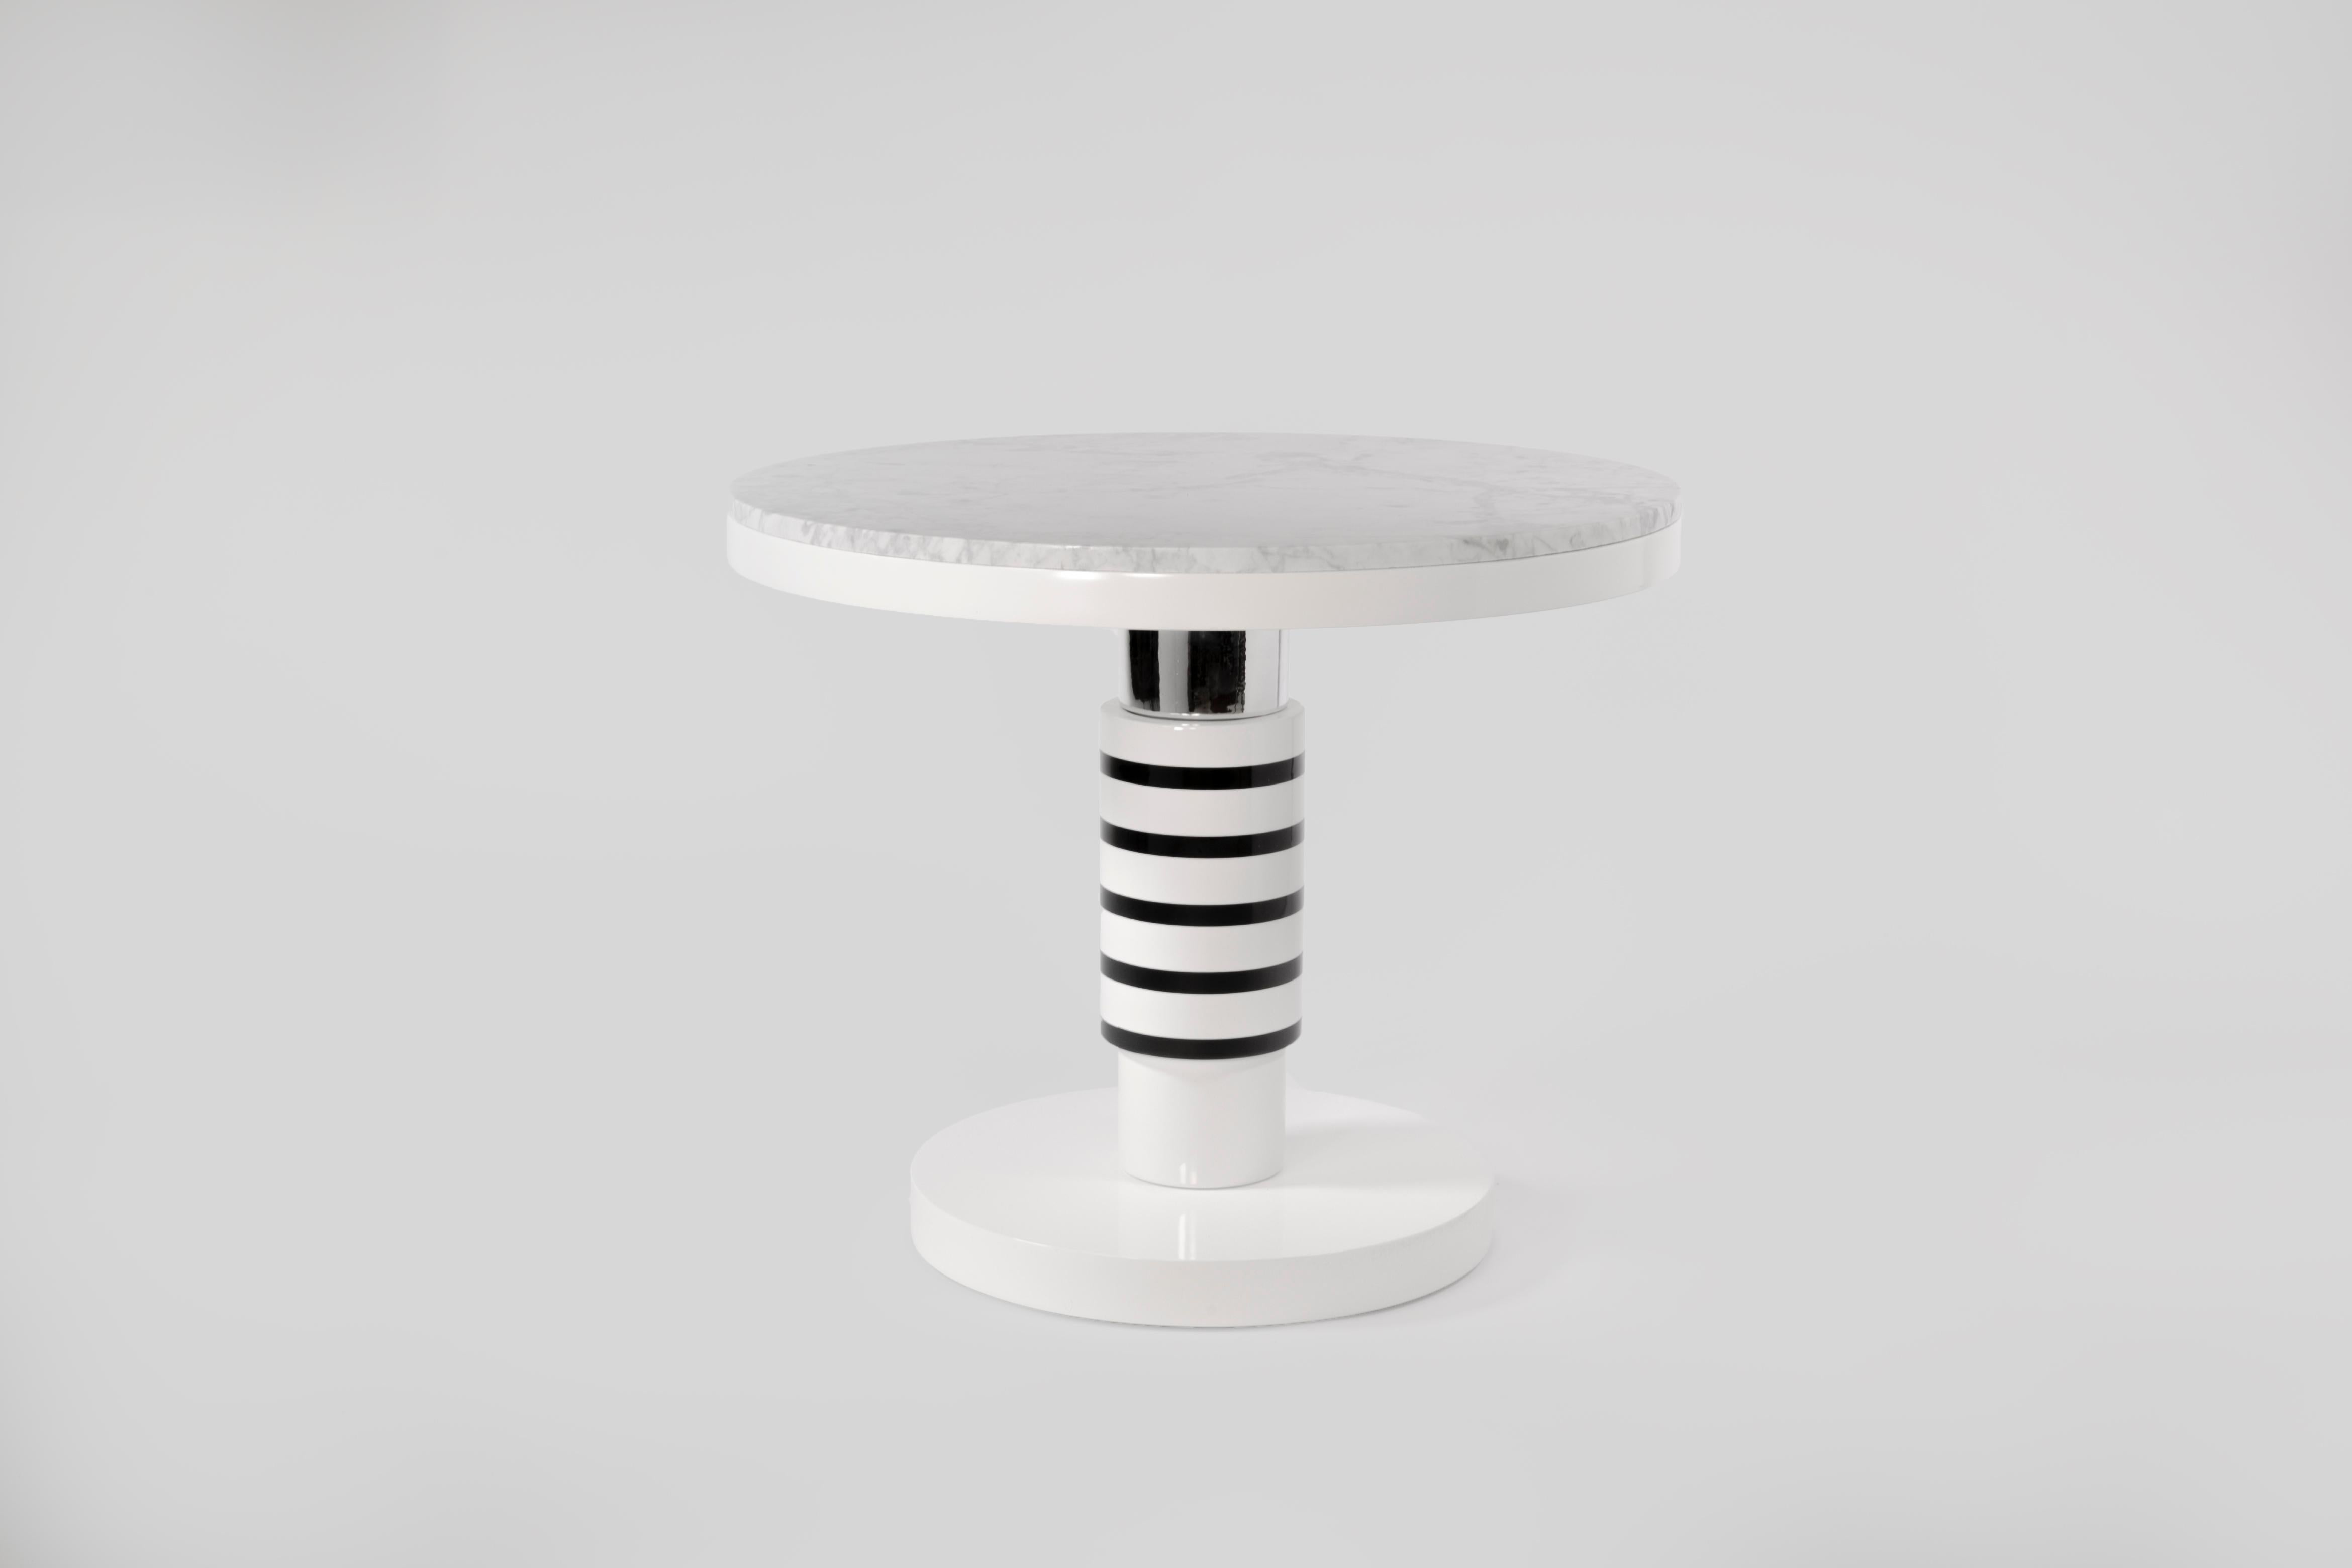 Marble and ceramic large coffee table by Eric Willemart
Materials: Top: Polished Carrara marble paate embedded in a White Lacquered 
 Wooden Tray
 Body: Handcrafted ceramic glazed in black, white and silver finishes
Base: White lacquered wood on